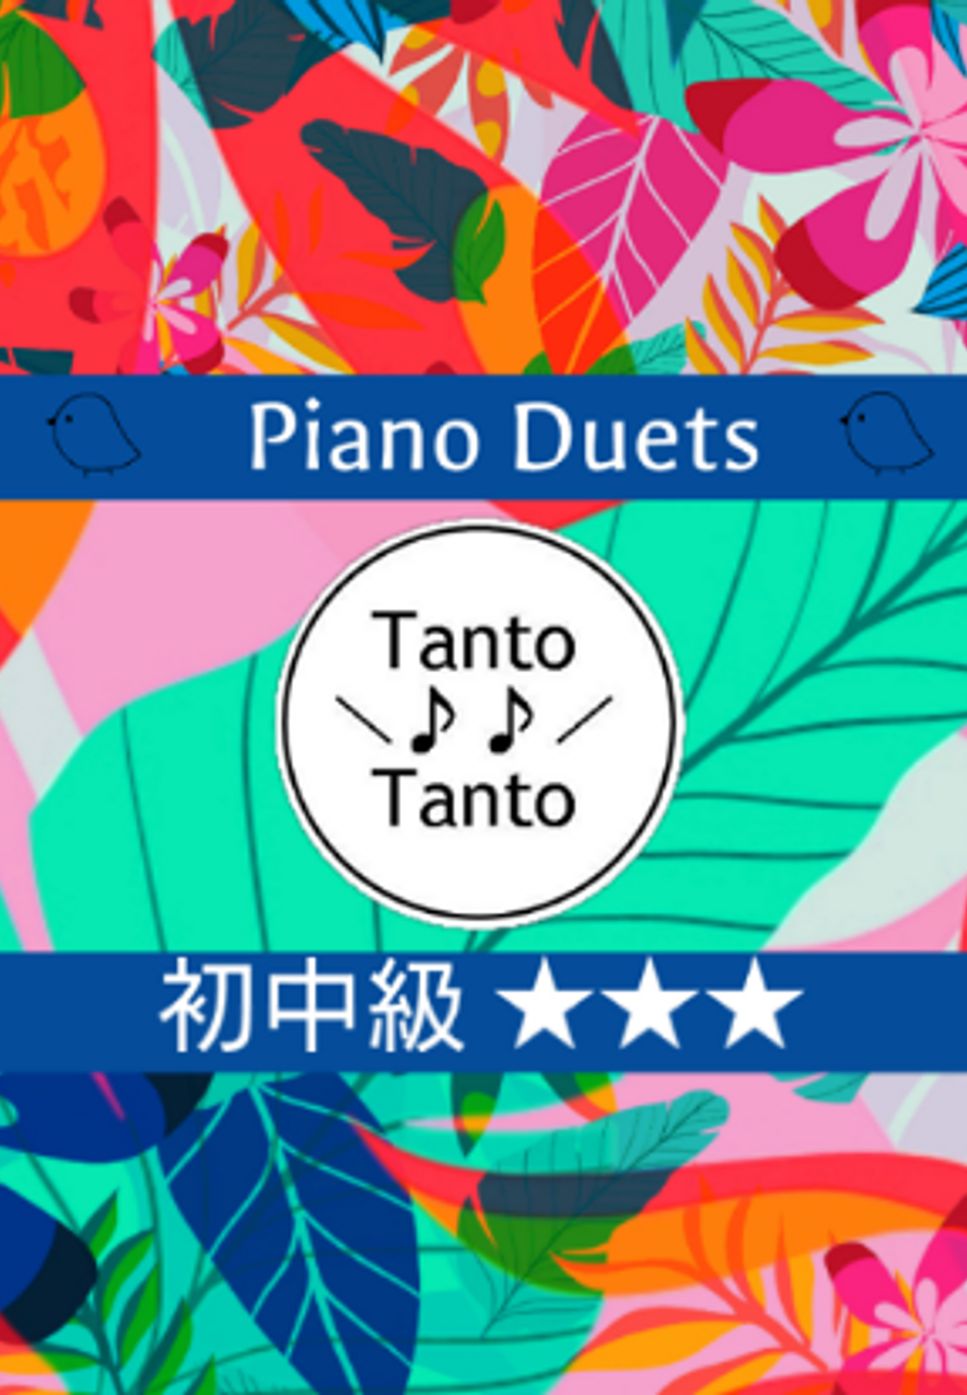 Jazzy かえるのうた Froschgesang (3手連弾 or ケンハモ伴奏 初中級 Piano Duets ＆ Solo 兼用 in C) by Tanto Tanto